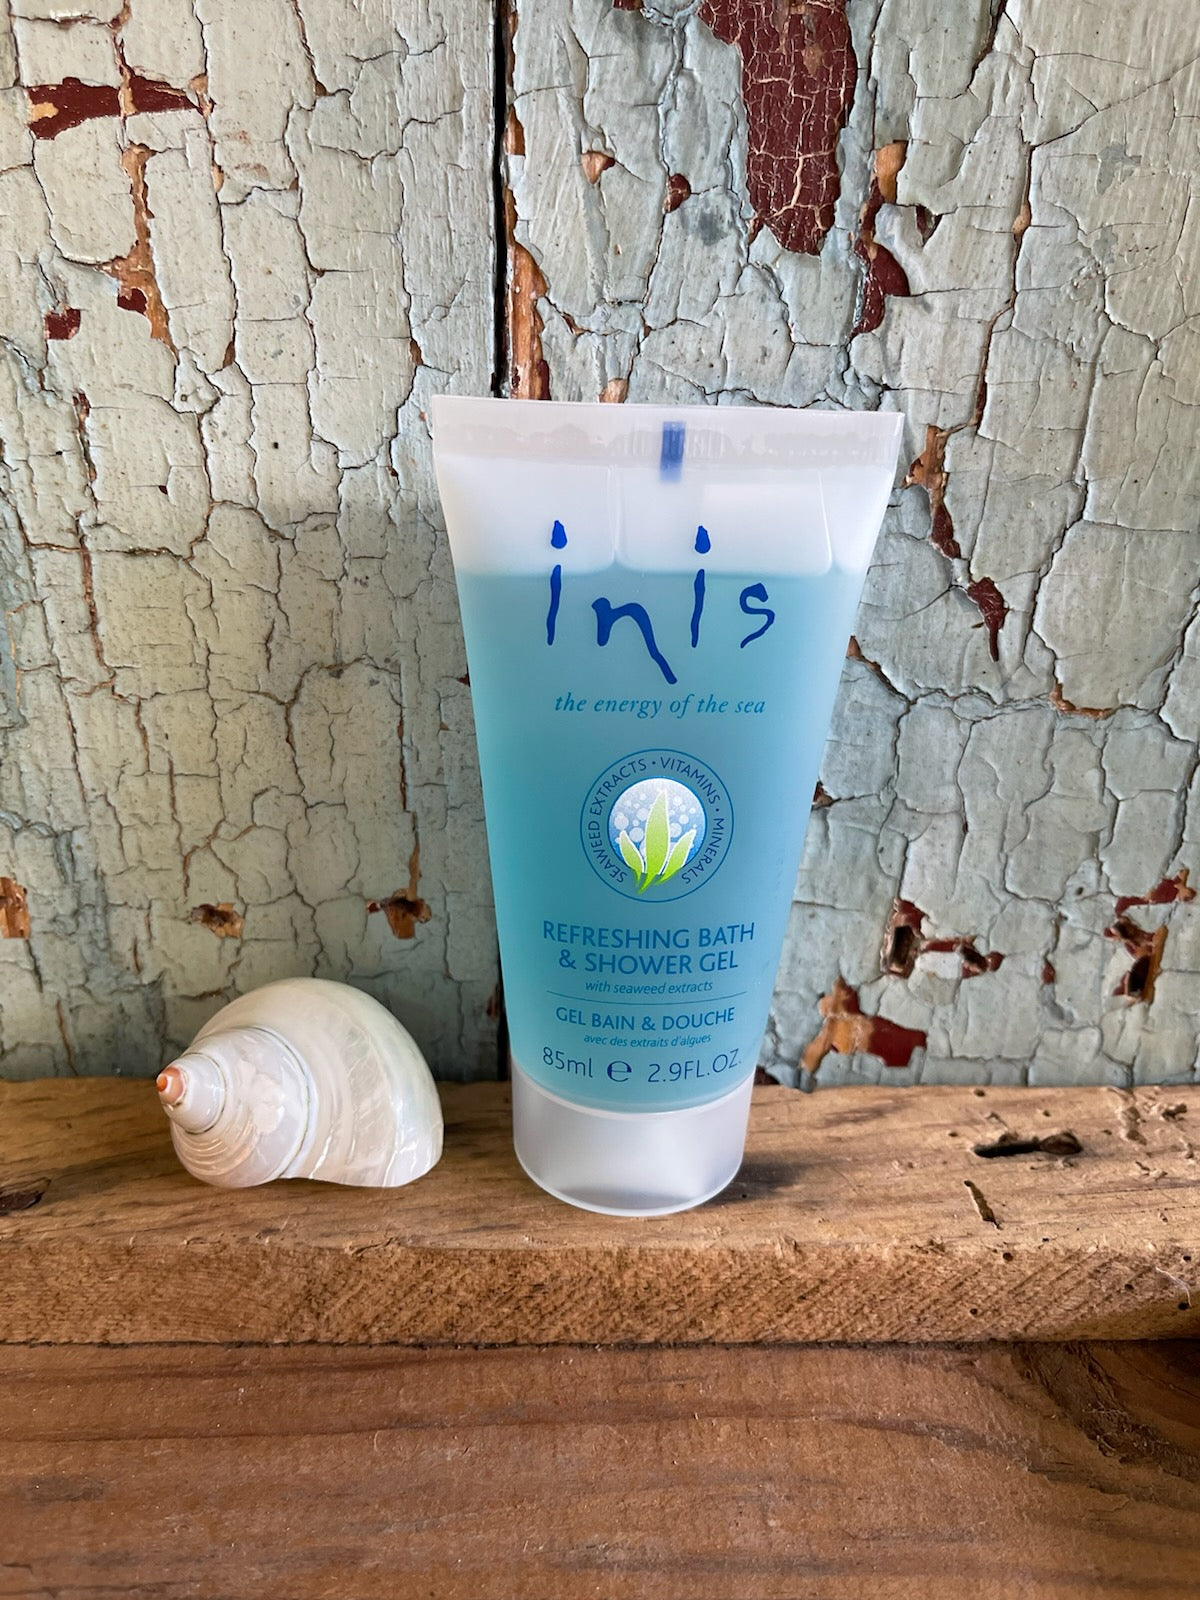 Inis Refreshing Bath & Shower Gel Travel Size 2.9 fl. oz.-Beauty & Wellness-Inis Fragrance-Market Street Nest, Fashionable Clothing, Shoes and Home Décor Located in Mabank, TX